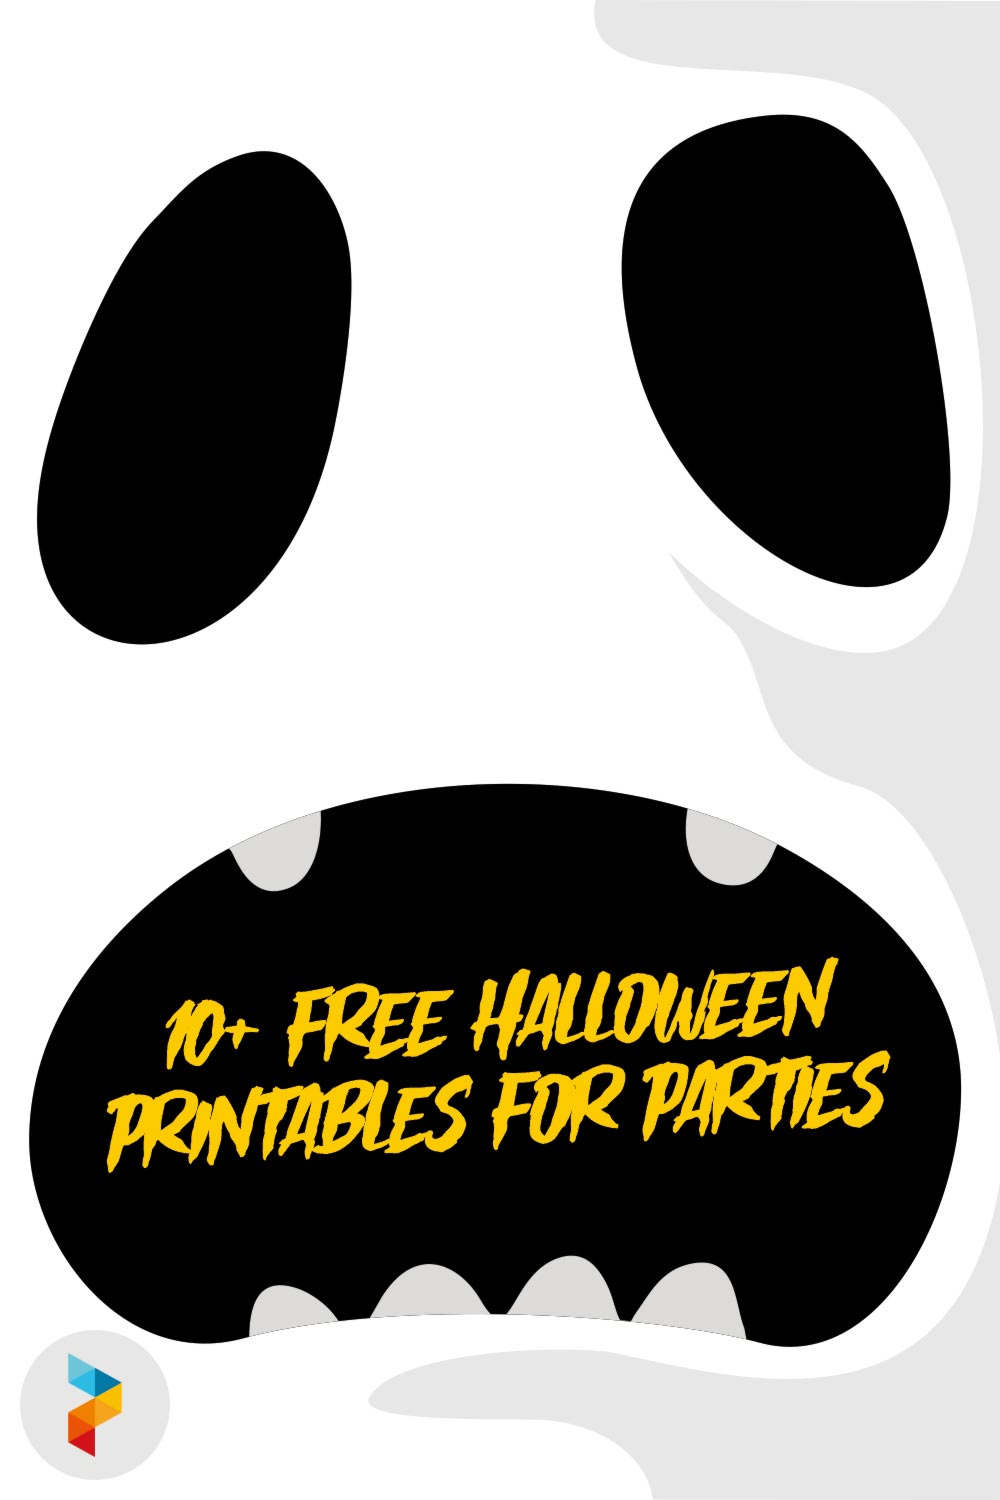 Halloween Printables For Parties